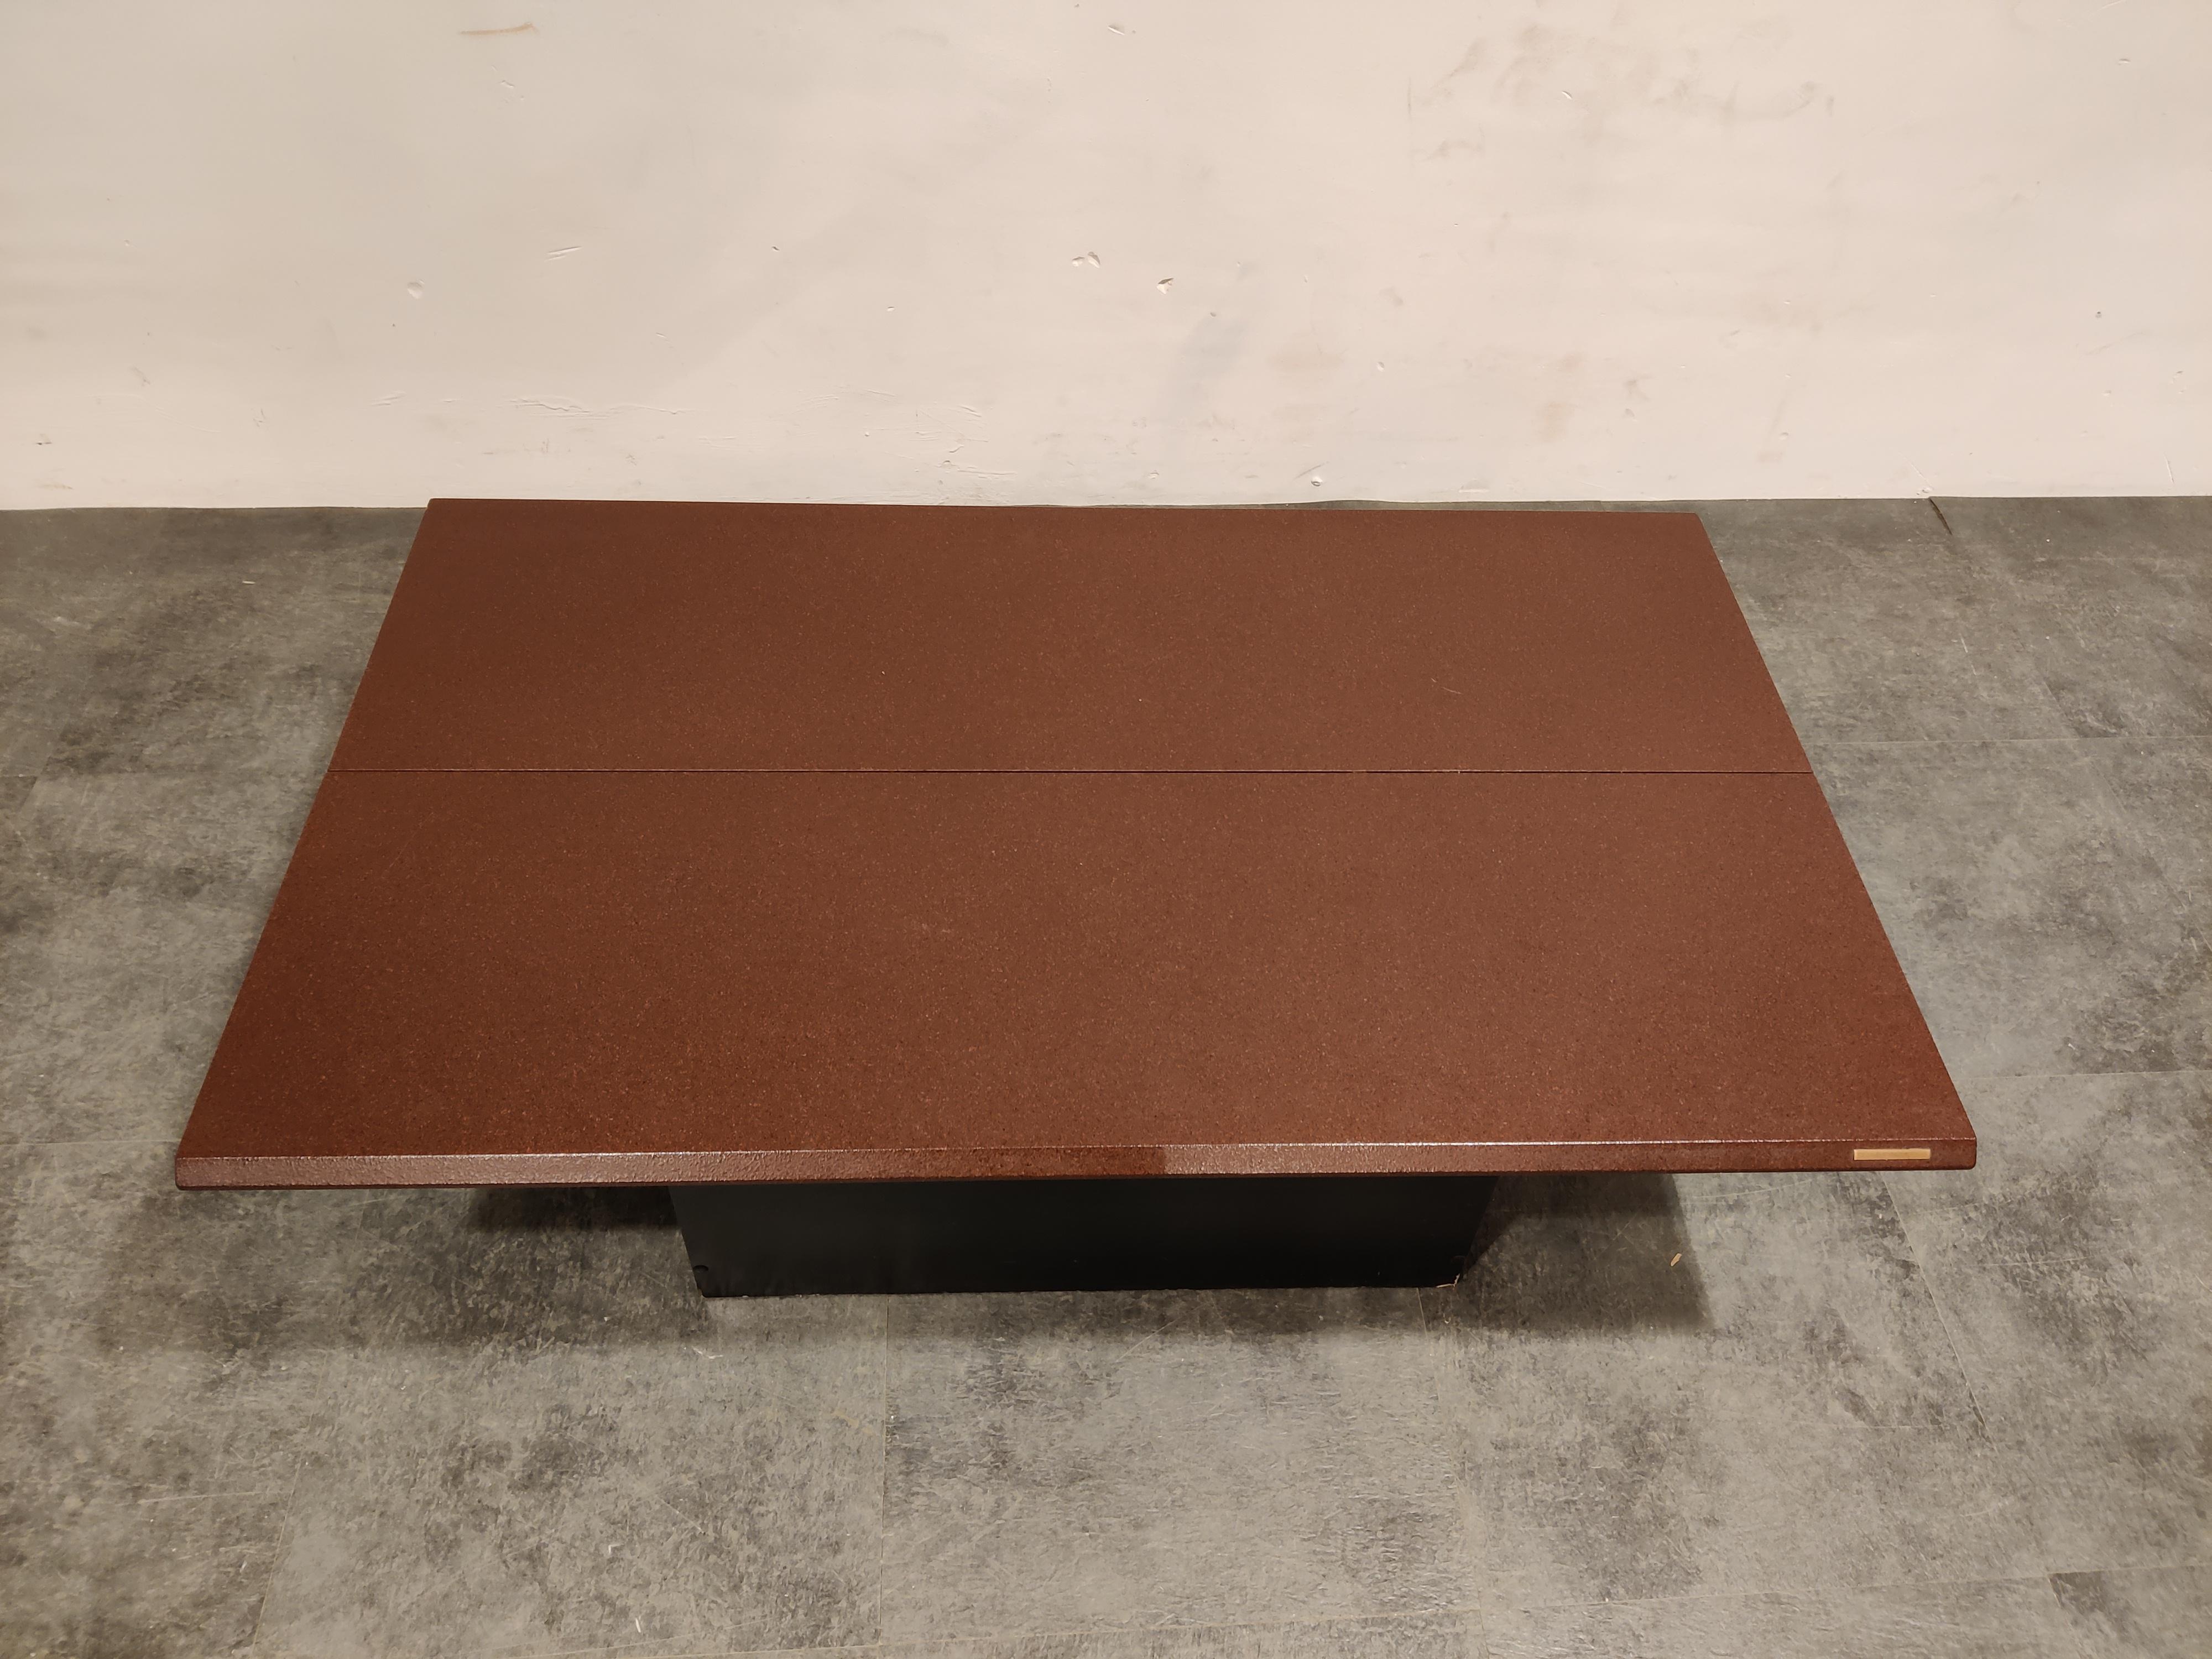 Eye catching coffee table with a hidden bar compartment.

The table consists of two red/bordeaux coloured wooden table tops and a black wooden base.

One top slides open whilst the other table top elevates revealing a bar compartment.

Nice